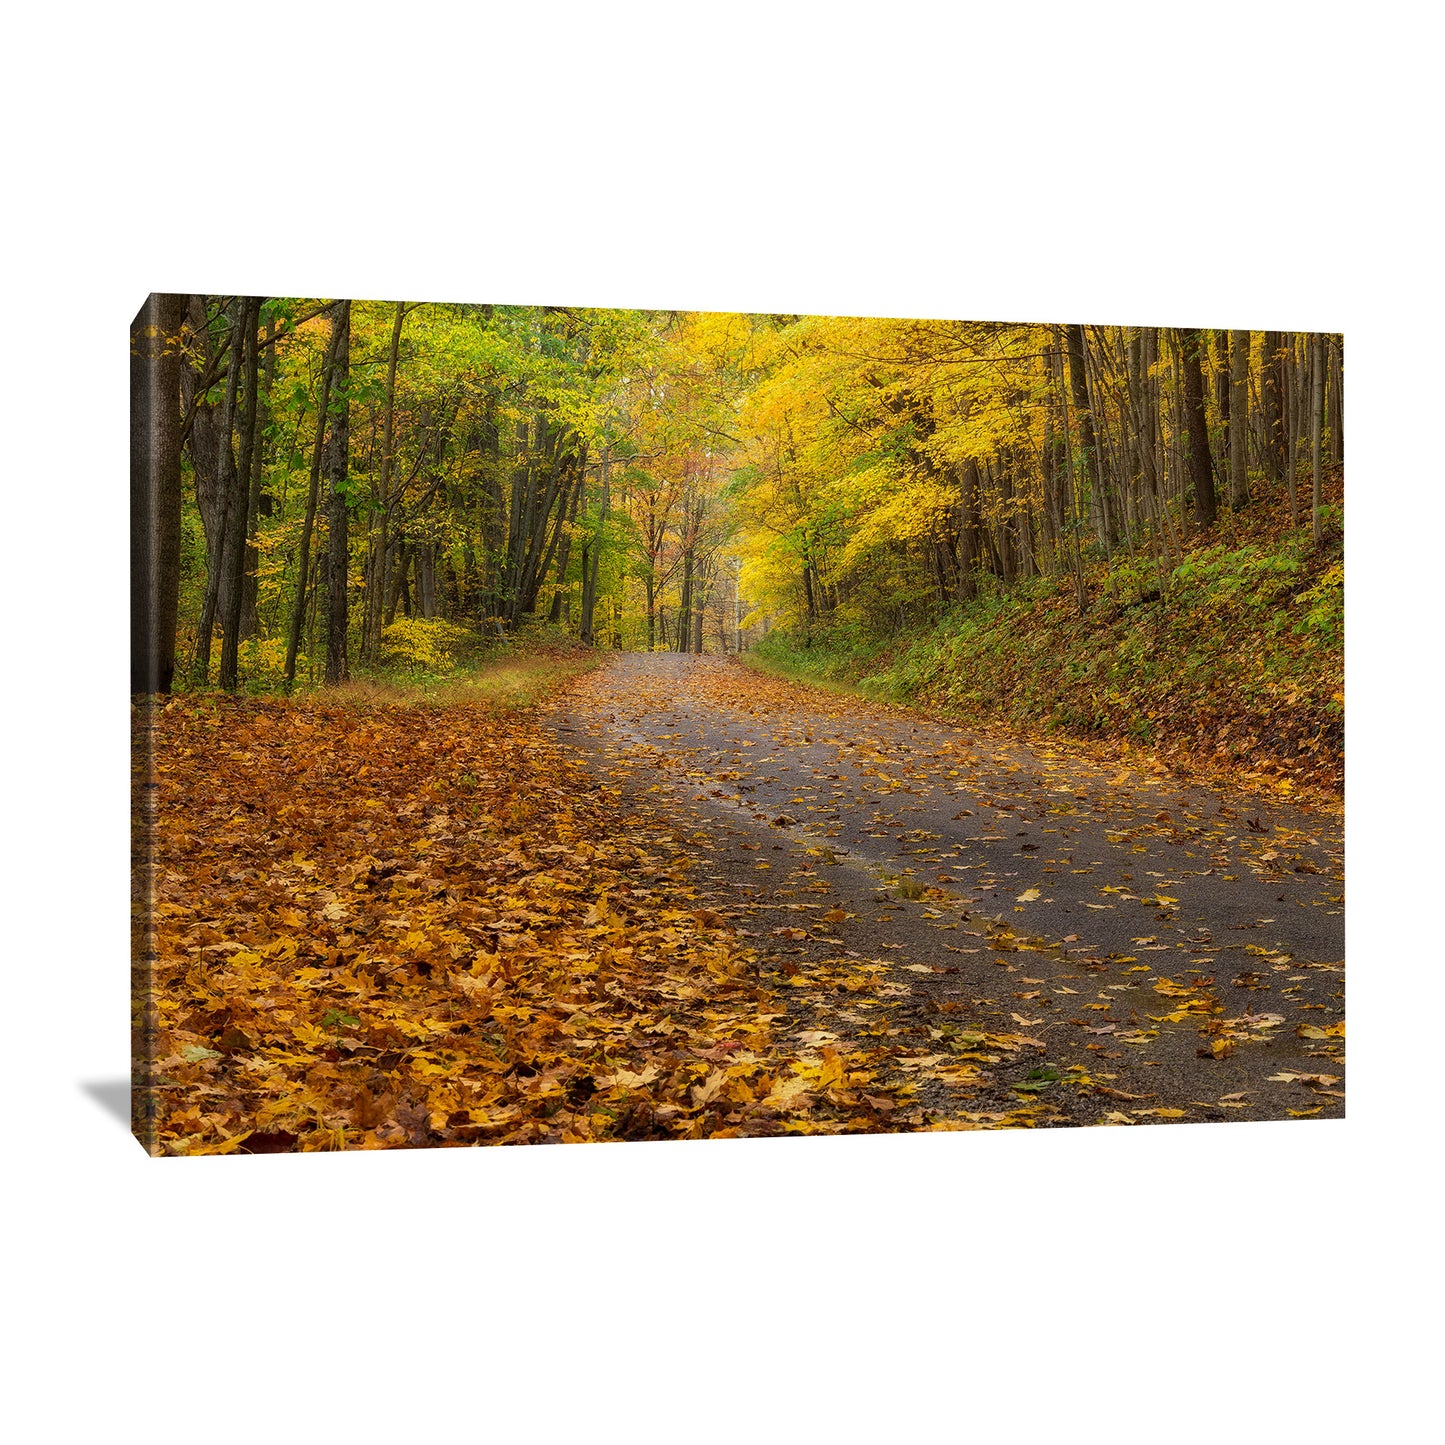 canvas wrap of an autumn road